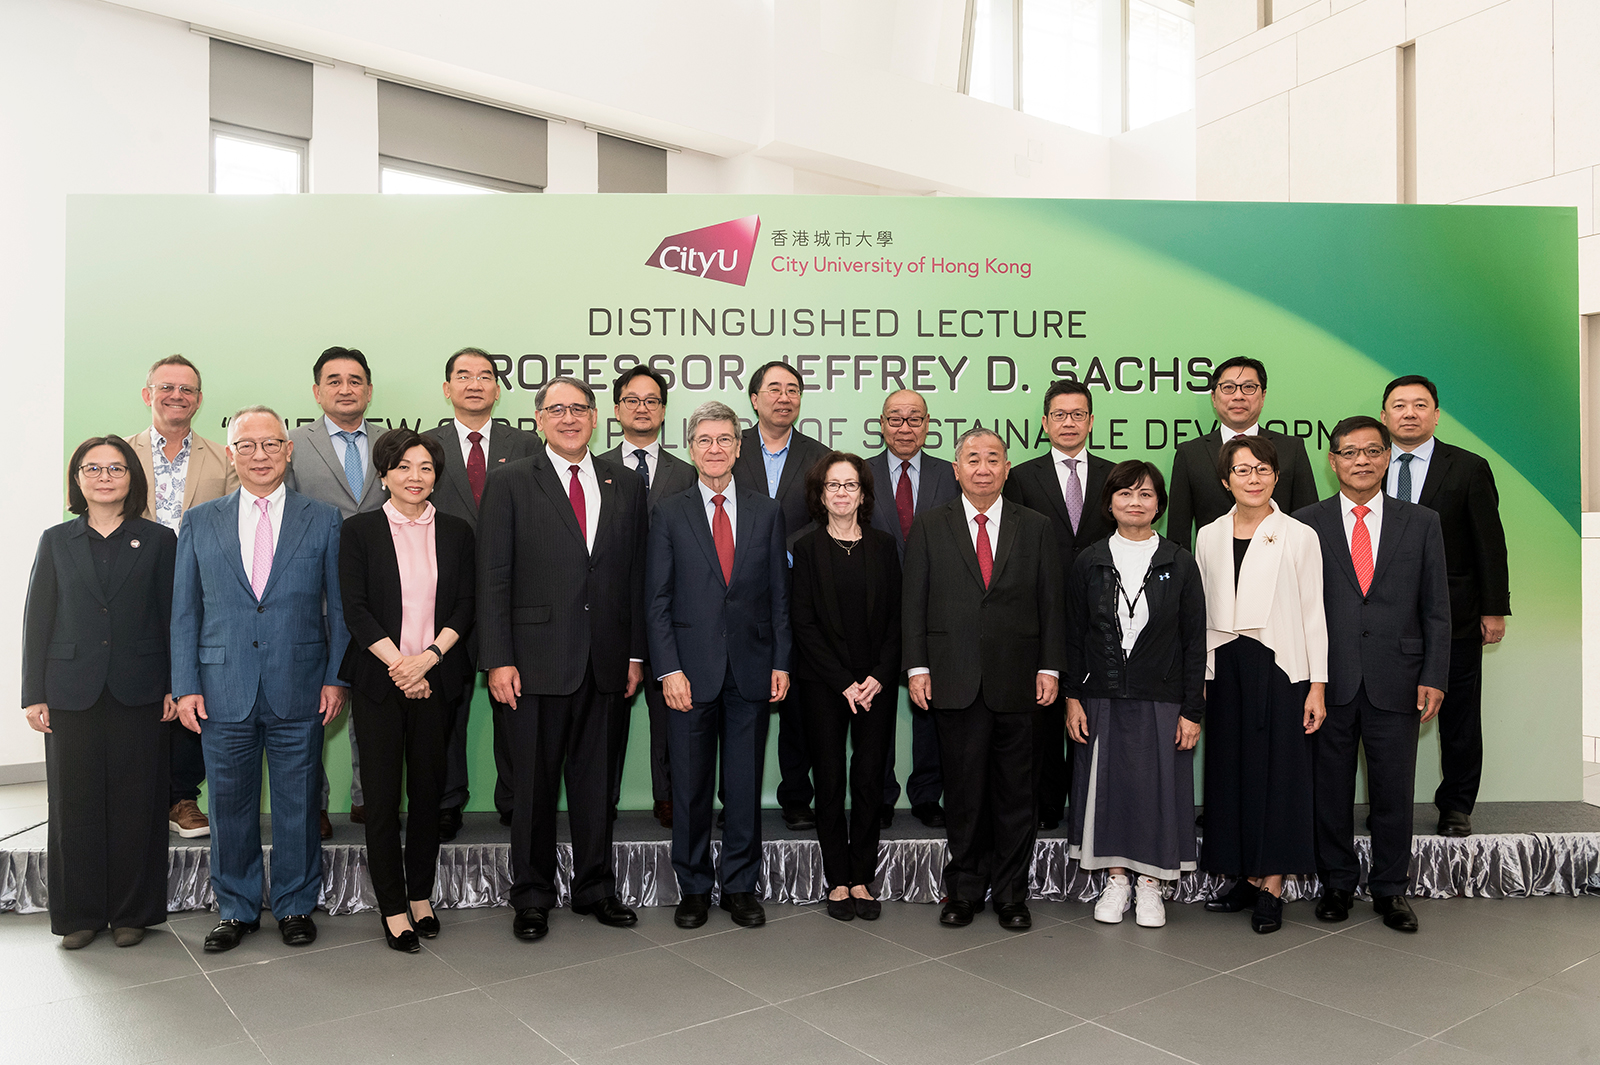 Mr Lester Garson Huang (forth from left, front row), Council Chairman of CityU, President Freddy Boey Yin Chiang (forth from right, front row), Ms Lilian Chiang Sui-fook (third from left, front row), Council Deputy Chairman, Mr Charles Chin Ying-on (first from right, front row), Council Treasurer, and guests take photo with Professor and Mrs Sachs (fifth and sixth from left, front row).